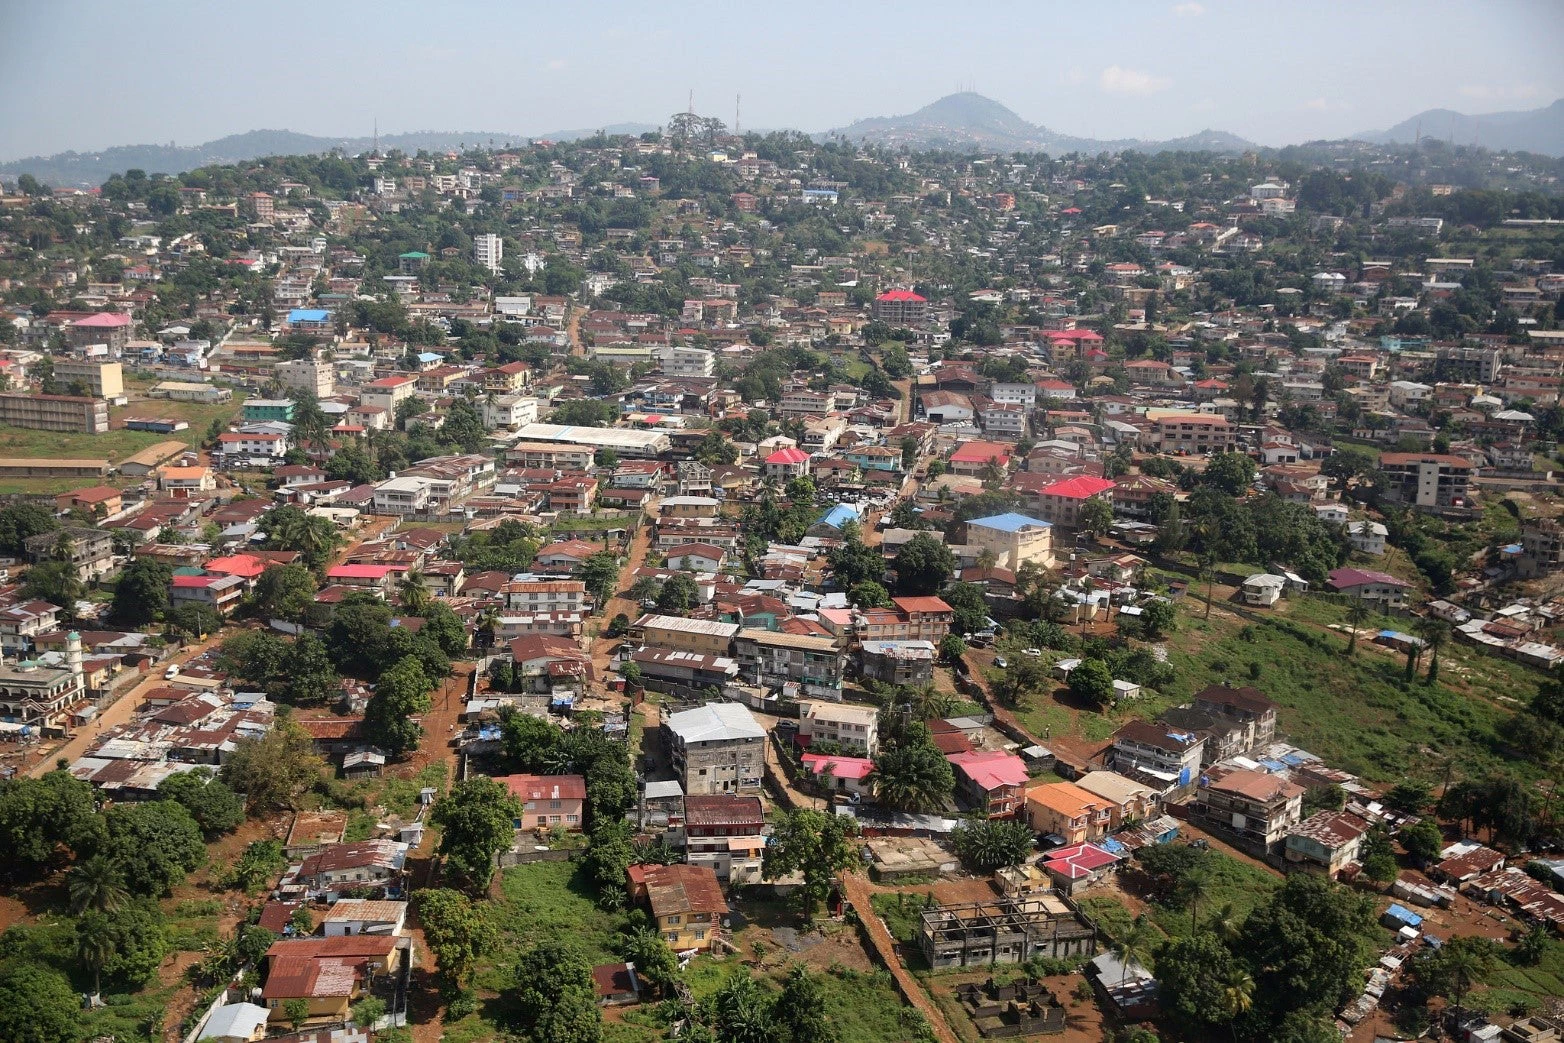 A view of Freetown Sierra Leone on December 3, 2014